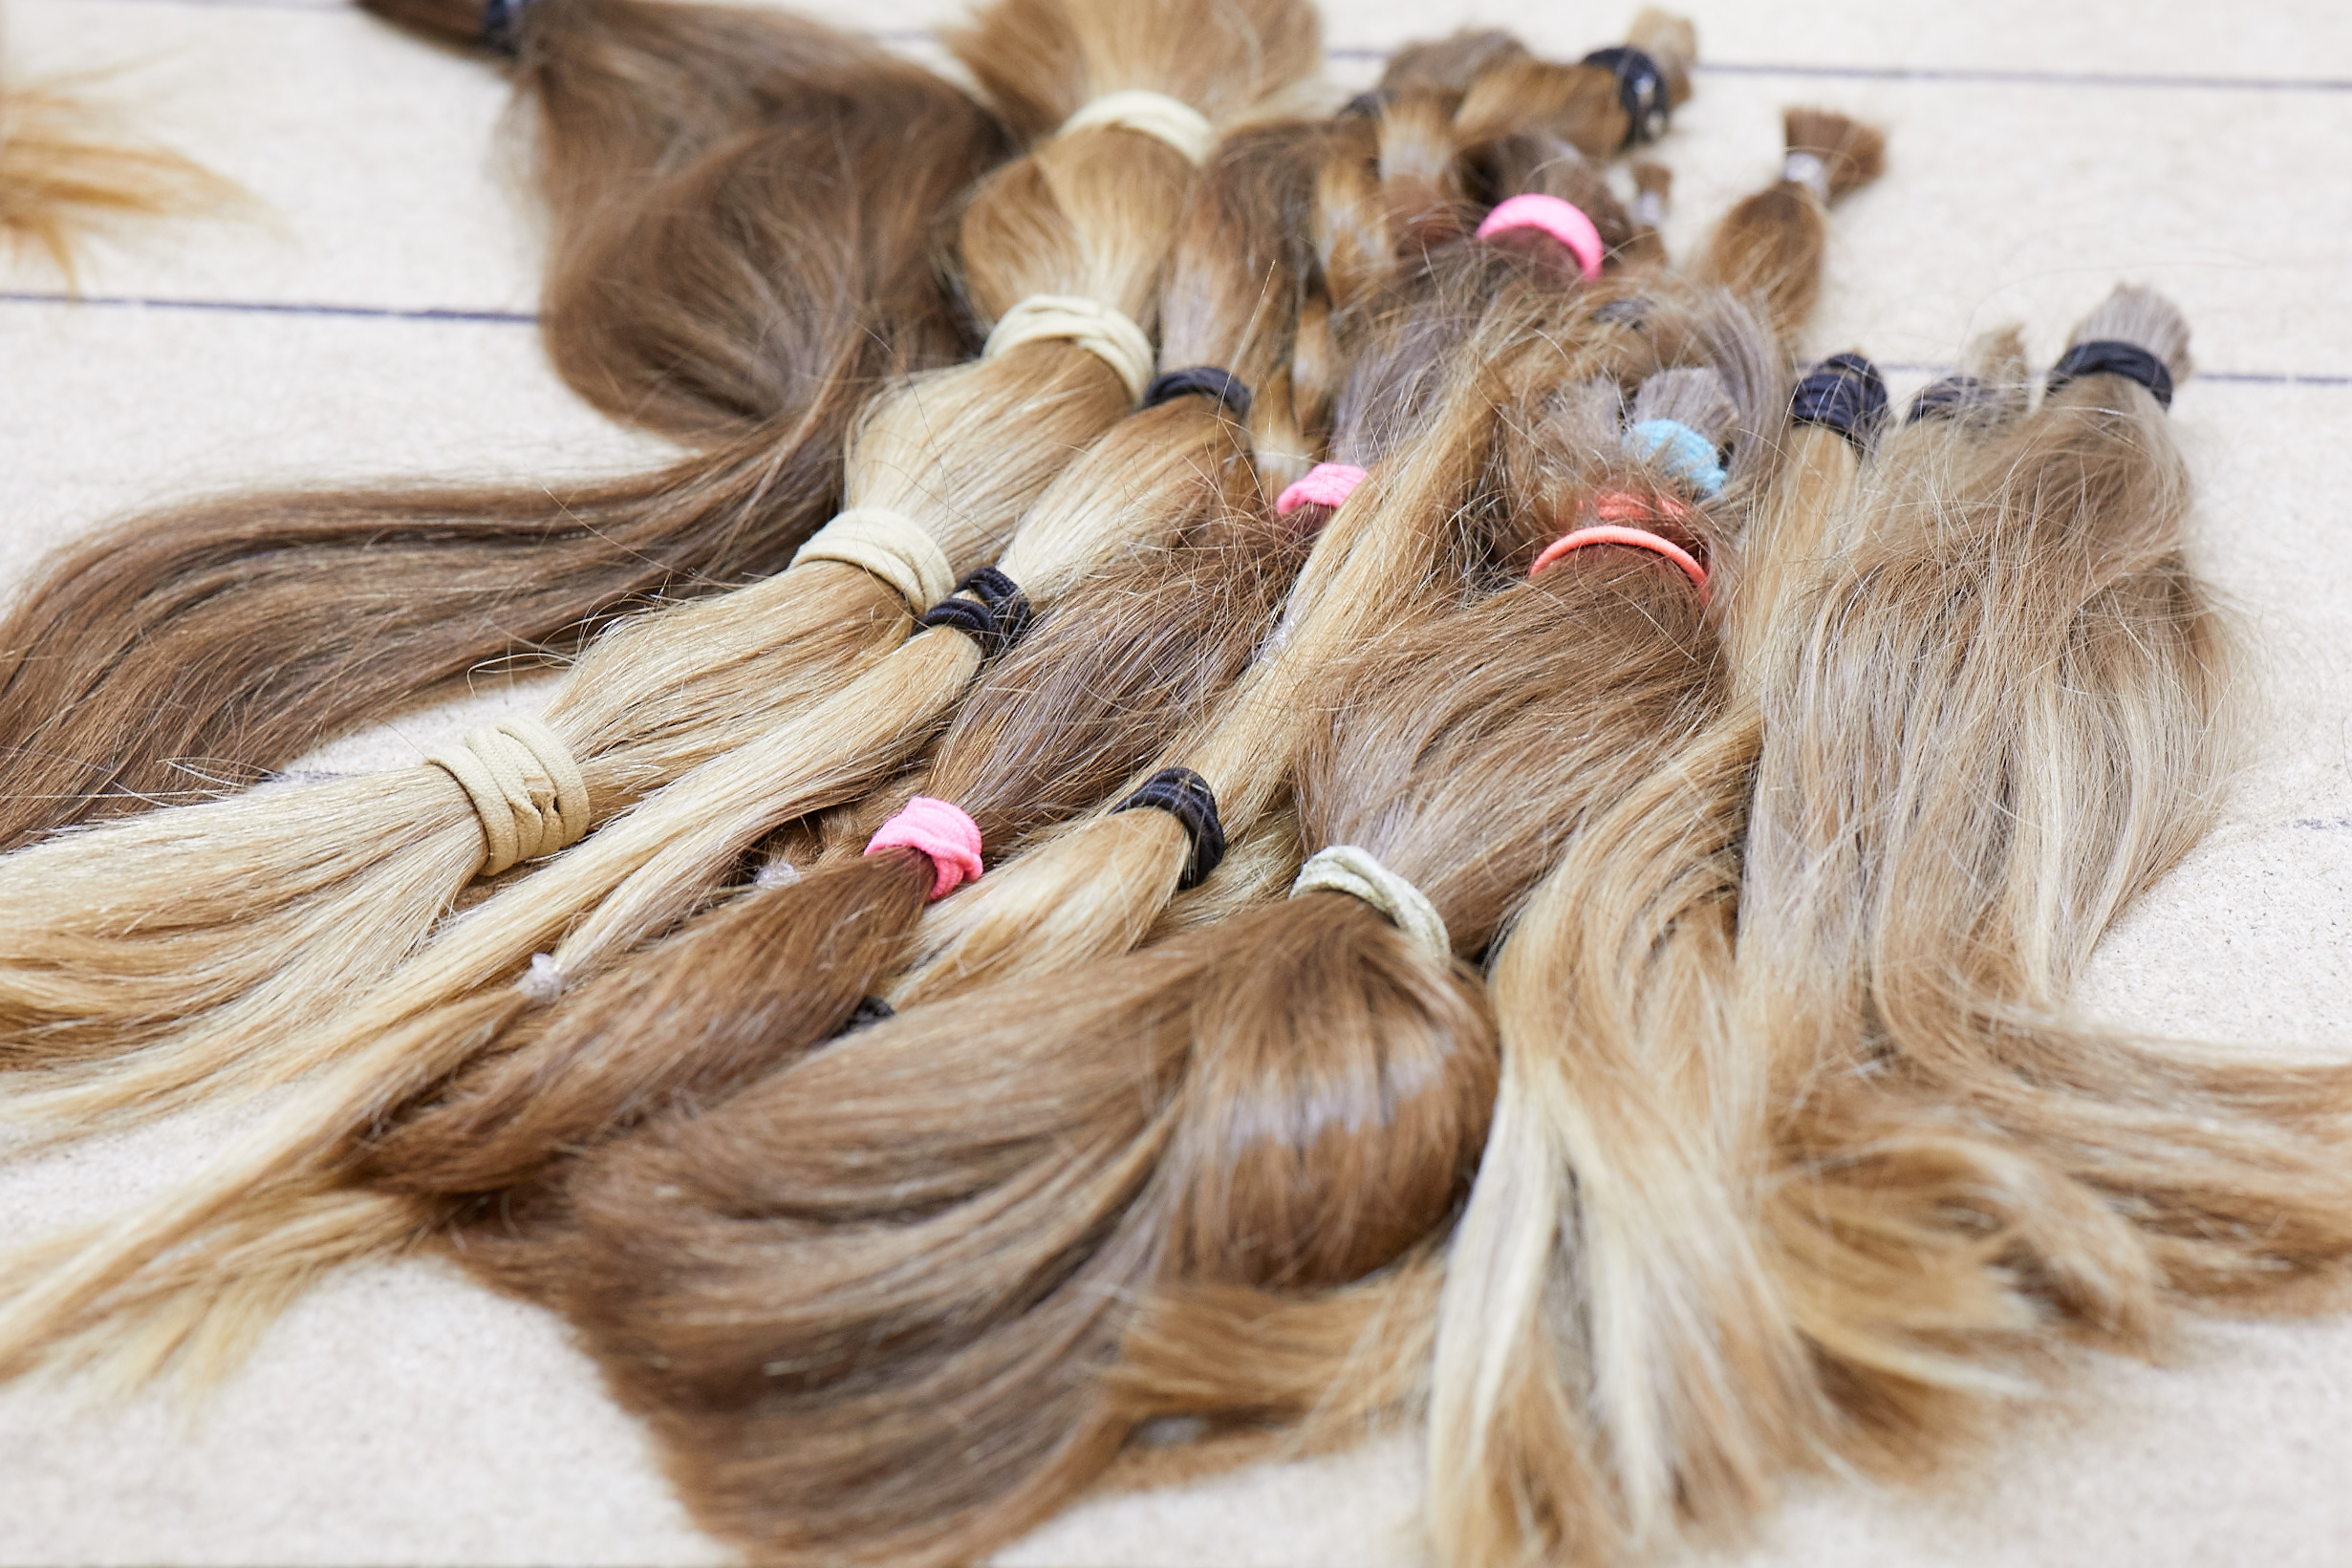 The Little Princess Trust uses hair donations from its supporters to make real hair wigs for children and young people.